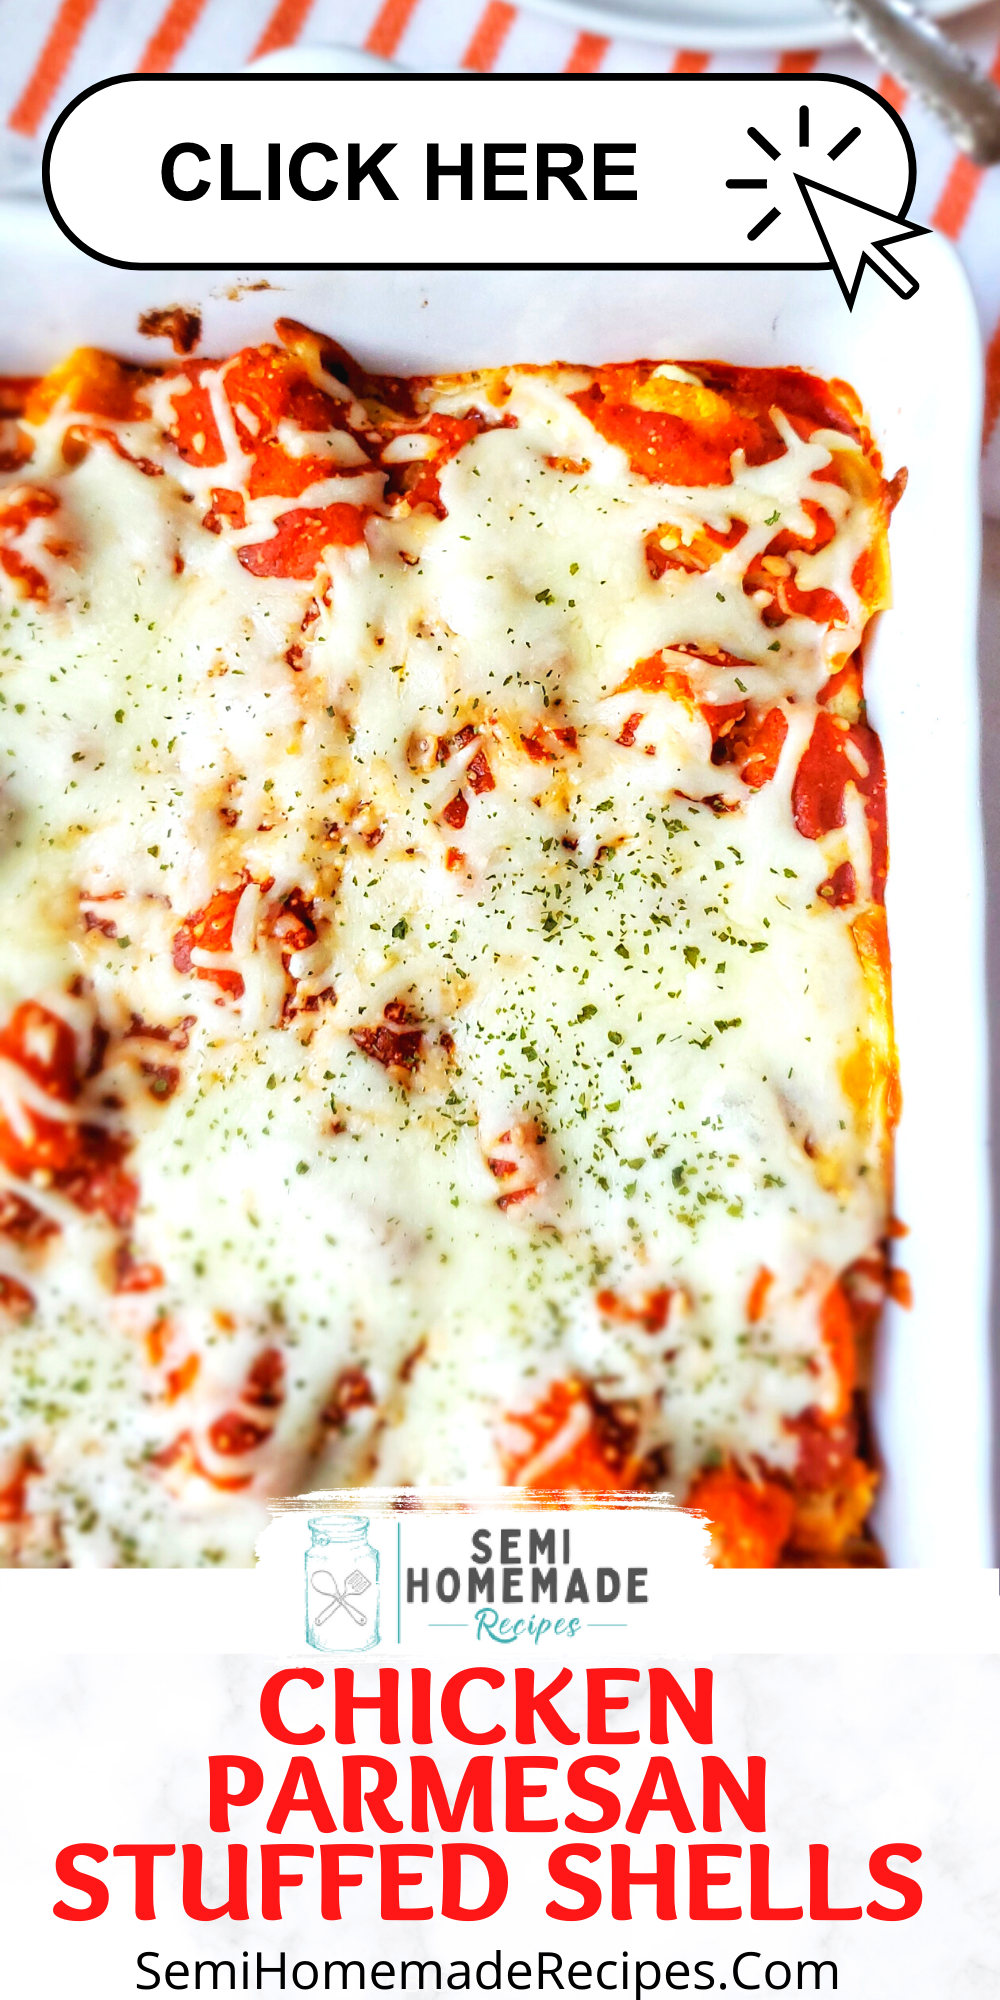 This super easy semi homemade recipe combines tasty Chicken Parmesan and Stuffed Shells to create a perfect Chicken Parmesan Stuffed Shells dinner! 